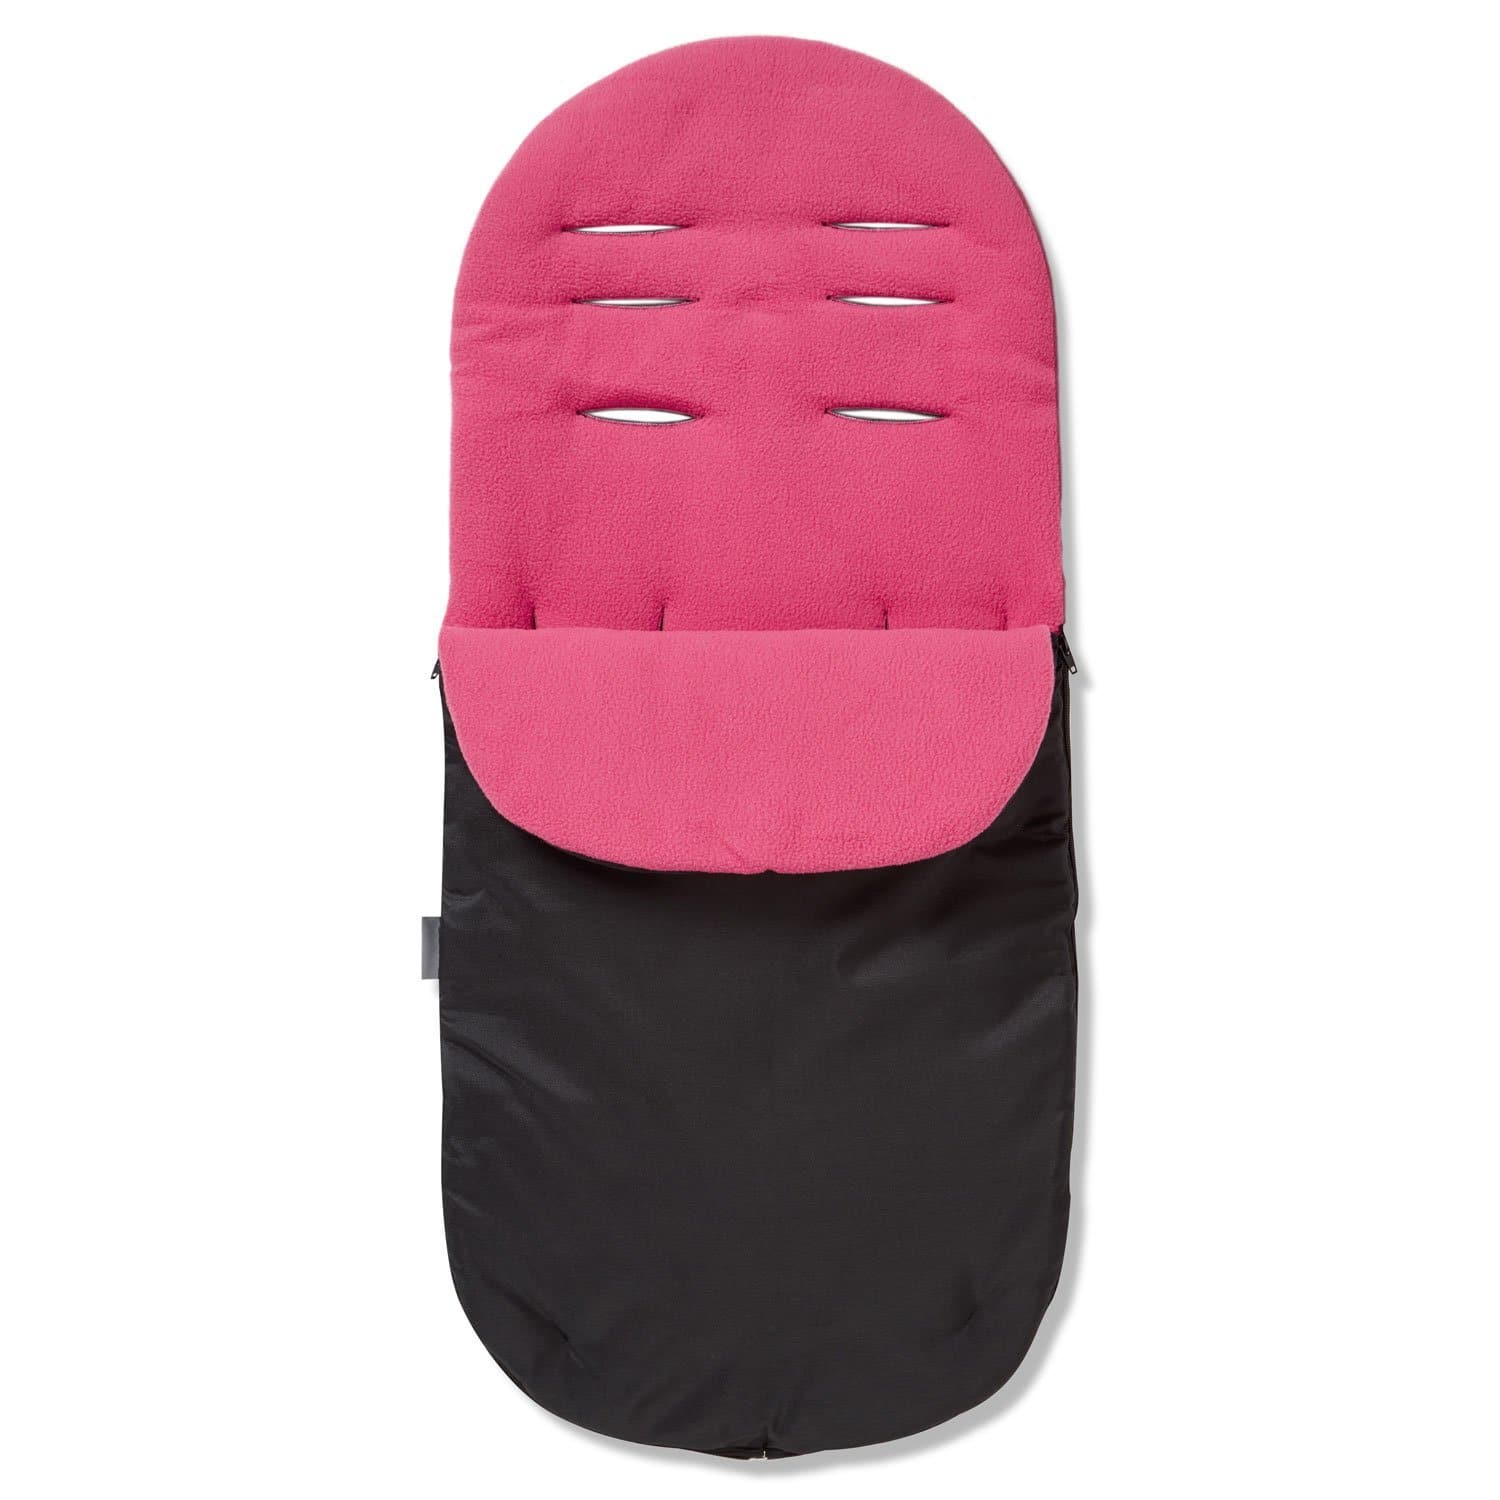 Footmuff / Cosy Toes Compatible with Seed - Dark Pink / Fits All Models | For Your Little One